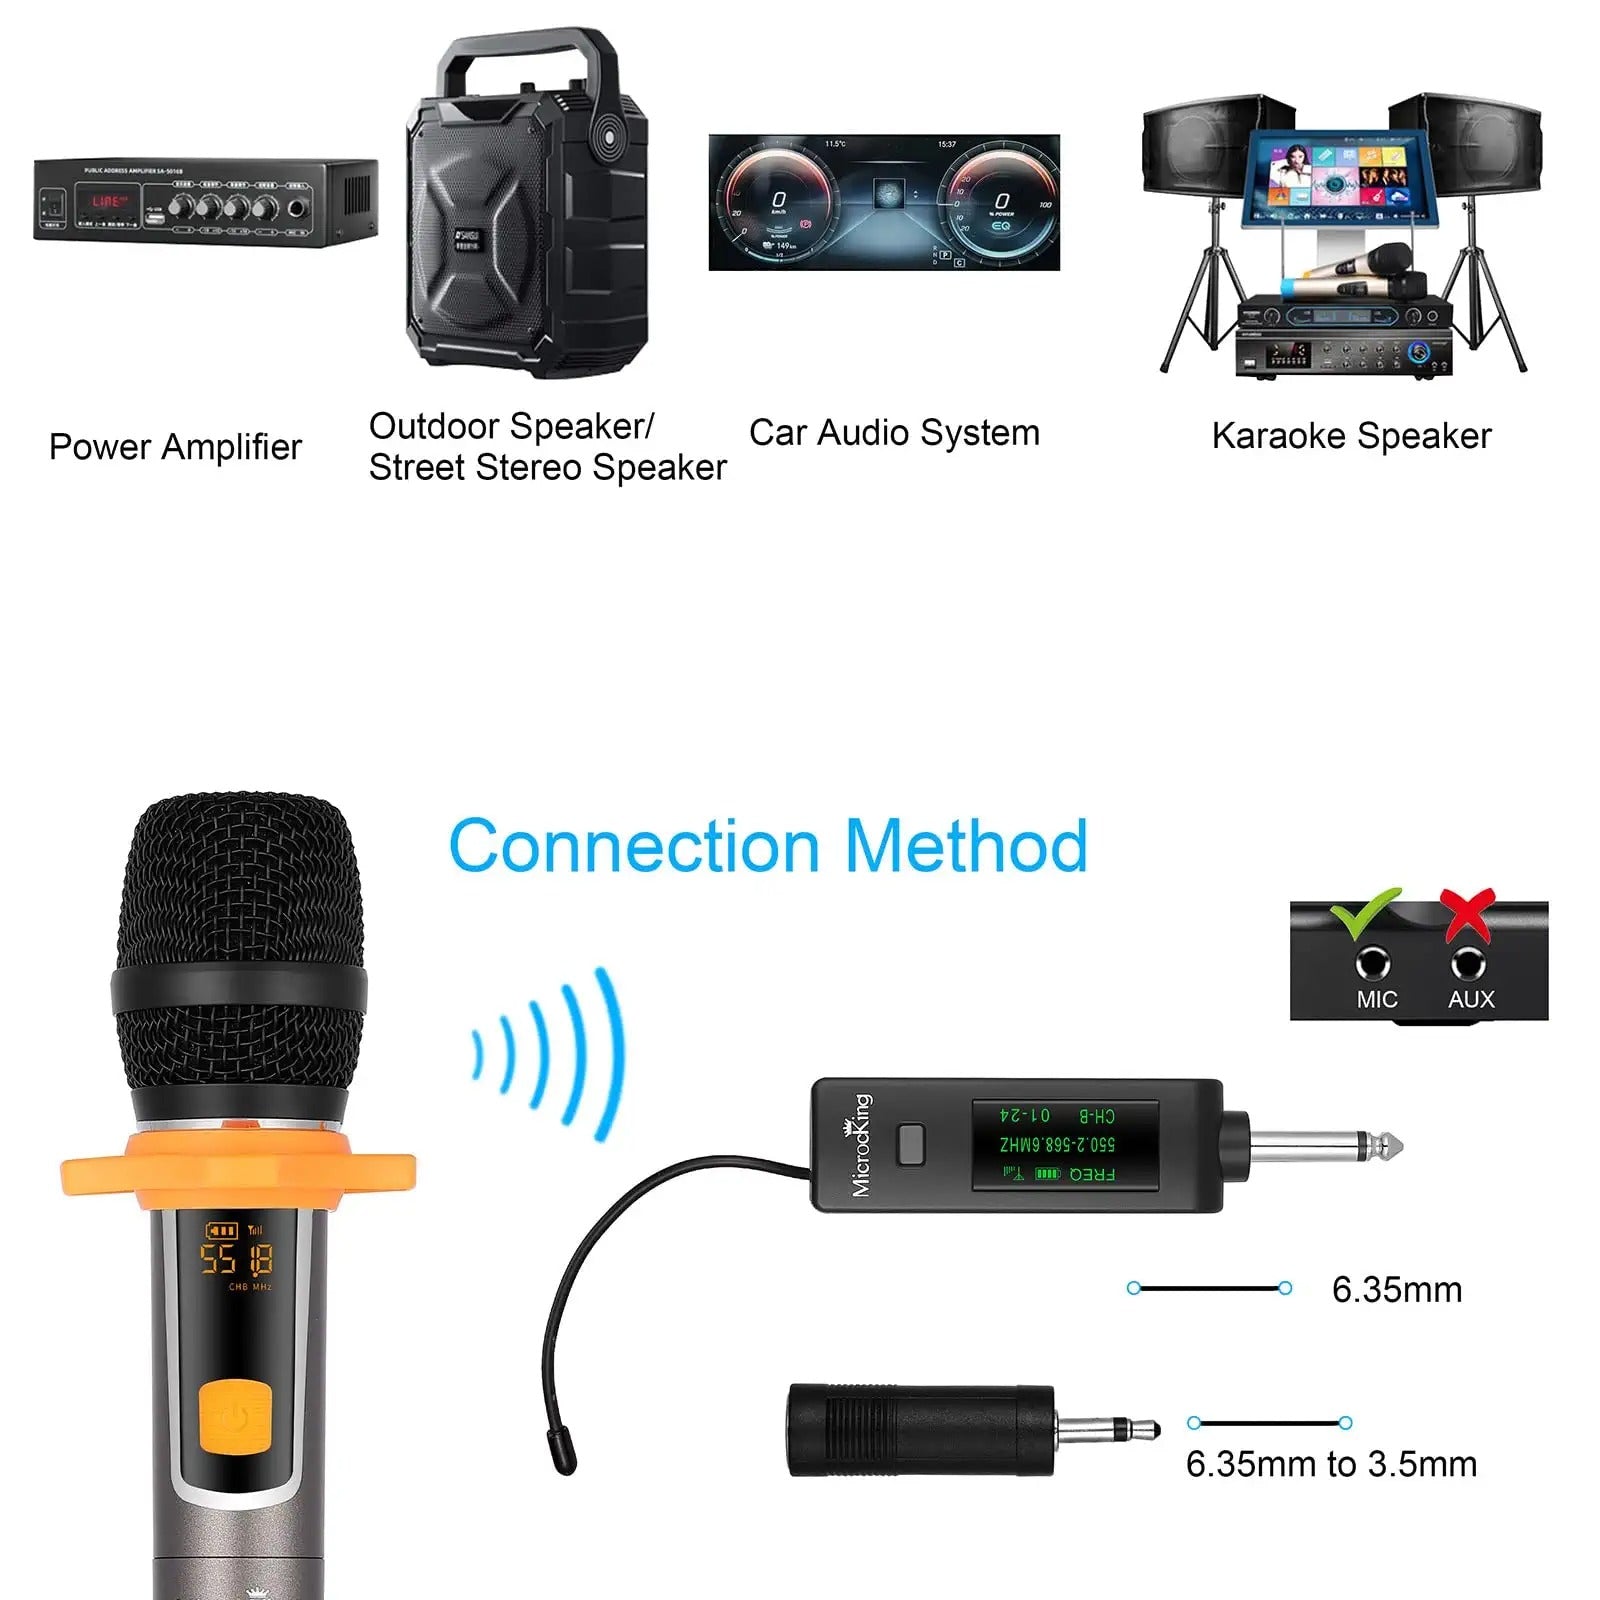 MicrocKing Wireless Microphone System, with 4 Handheld Mics, Metal Build,  Fixed Frequency, Long Range 400ft, Ideal for